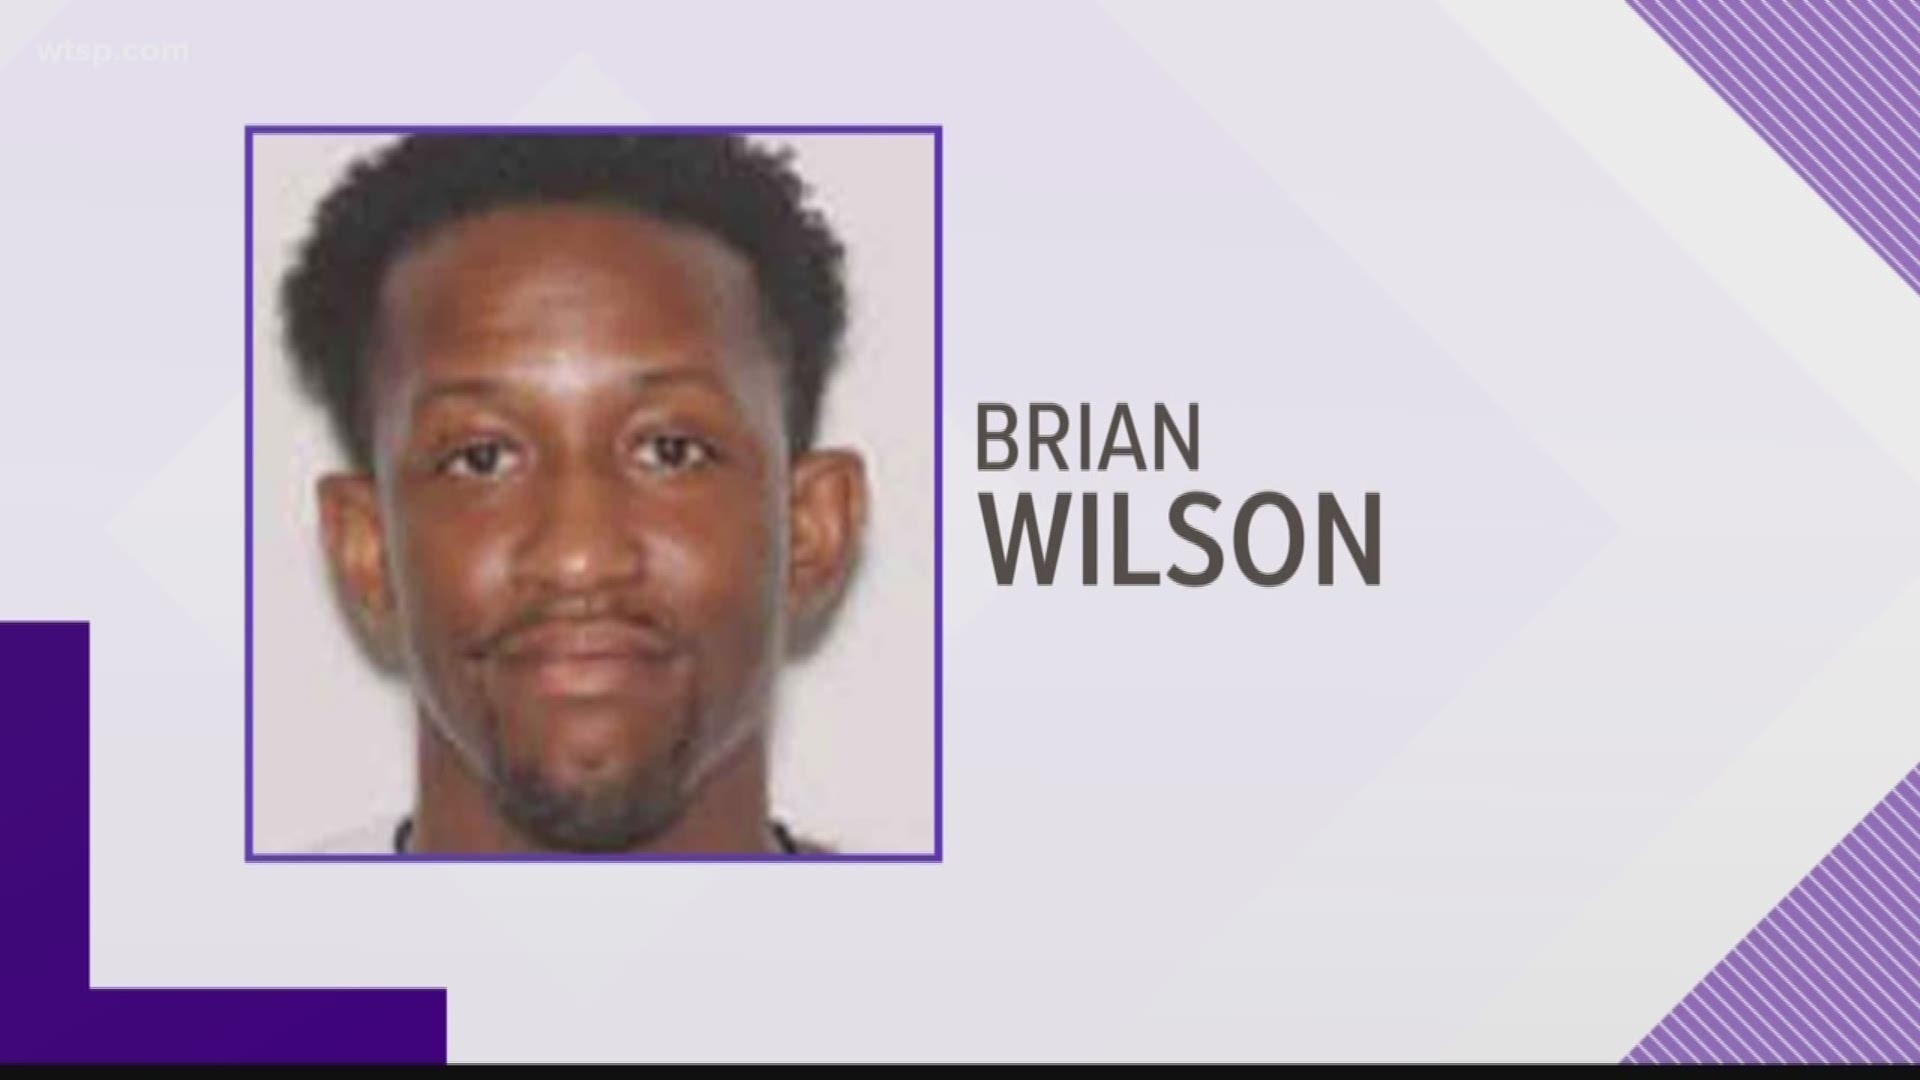 The suspect wanted in a deadly shooting at a Wesley Chapel apartment complex took his own life several counties away from the crime scene.

Brian Wilson, 34, was tracked from the Pasco County apartments to the Lakeshore Mall in Highlands County, the sheriff's office said. Surveillance in the area found Wilson sitting in a car in the mall's back parking lot.

As the SWAT team approached his car just after noon Saturday, deputies say Wilson drove off, crashed the car and shot himself.

Wilson was wanting in the shooting death of a 36-year-old woman at the Pasco Woods Apartments. He and the victim had a child together.

Authorities pleaded to Wilson to turn himself in to police.